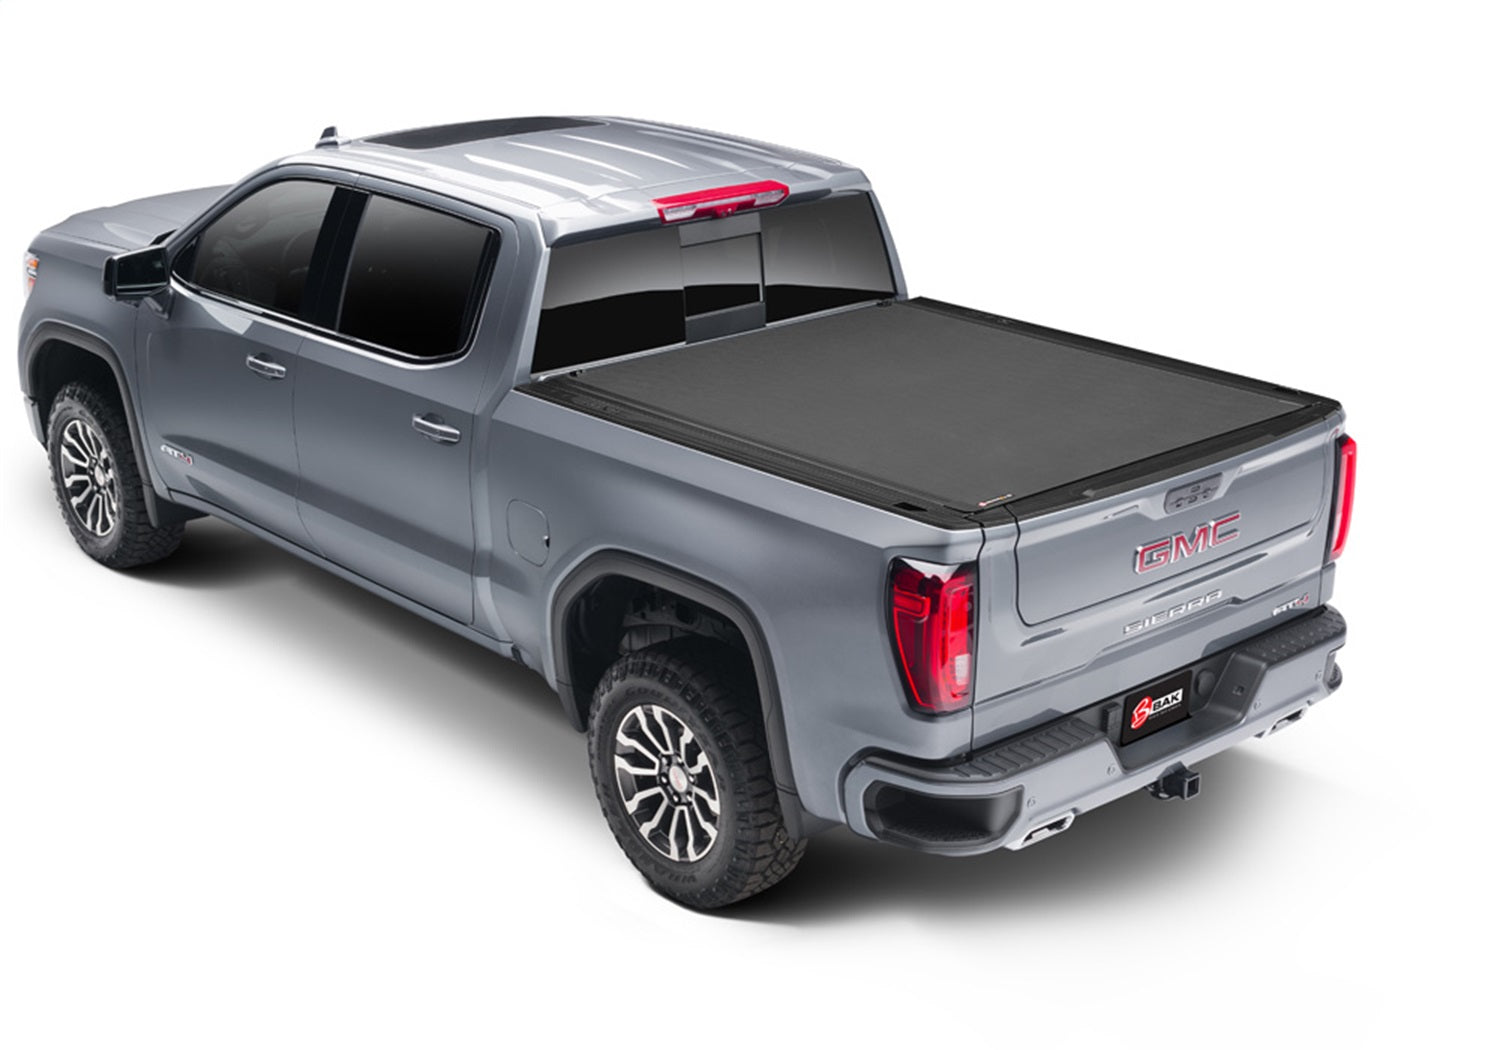 BAK Industries 80100 Revolver X4s Hard Rolling Truck Bed Cover